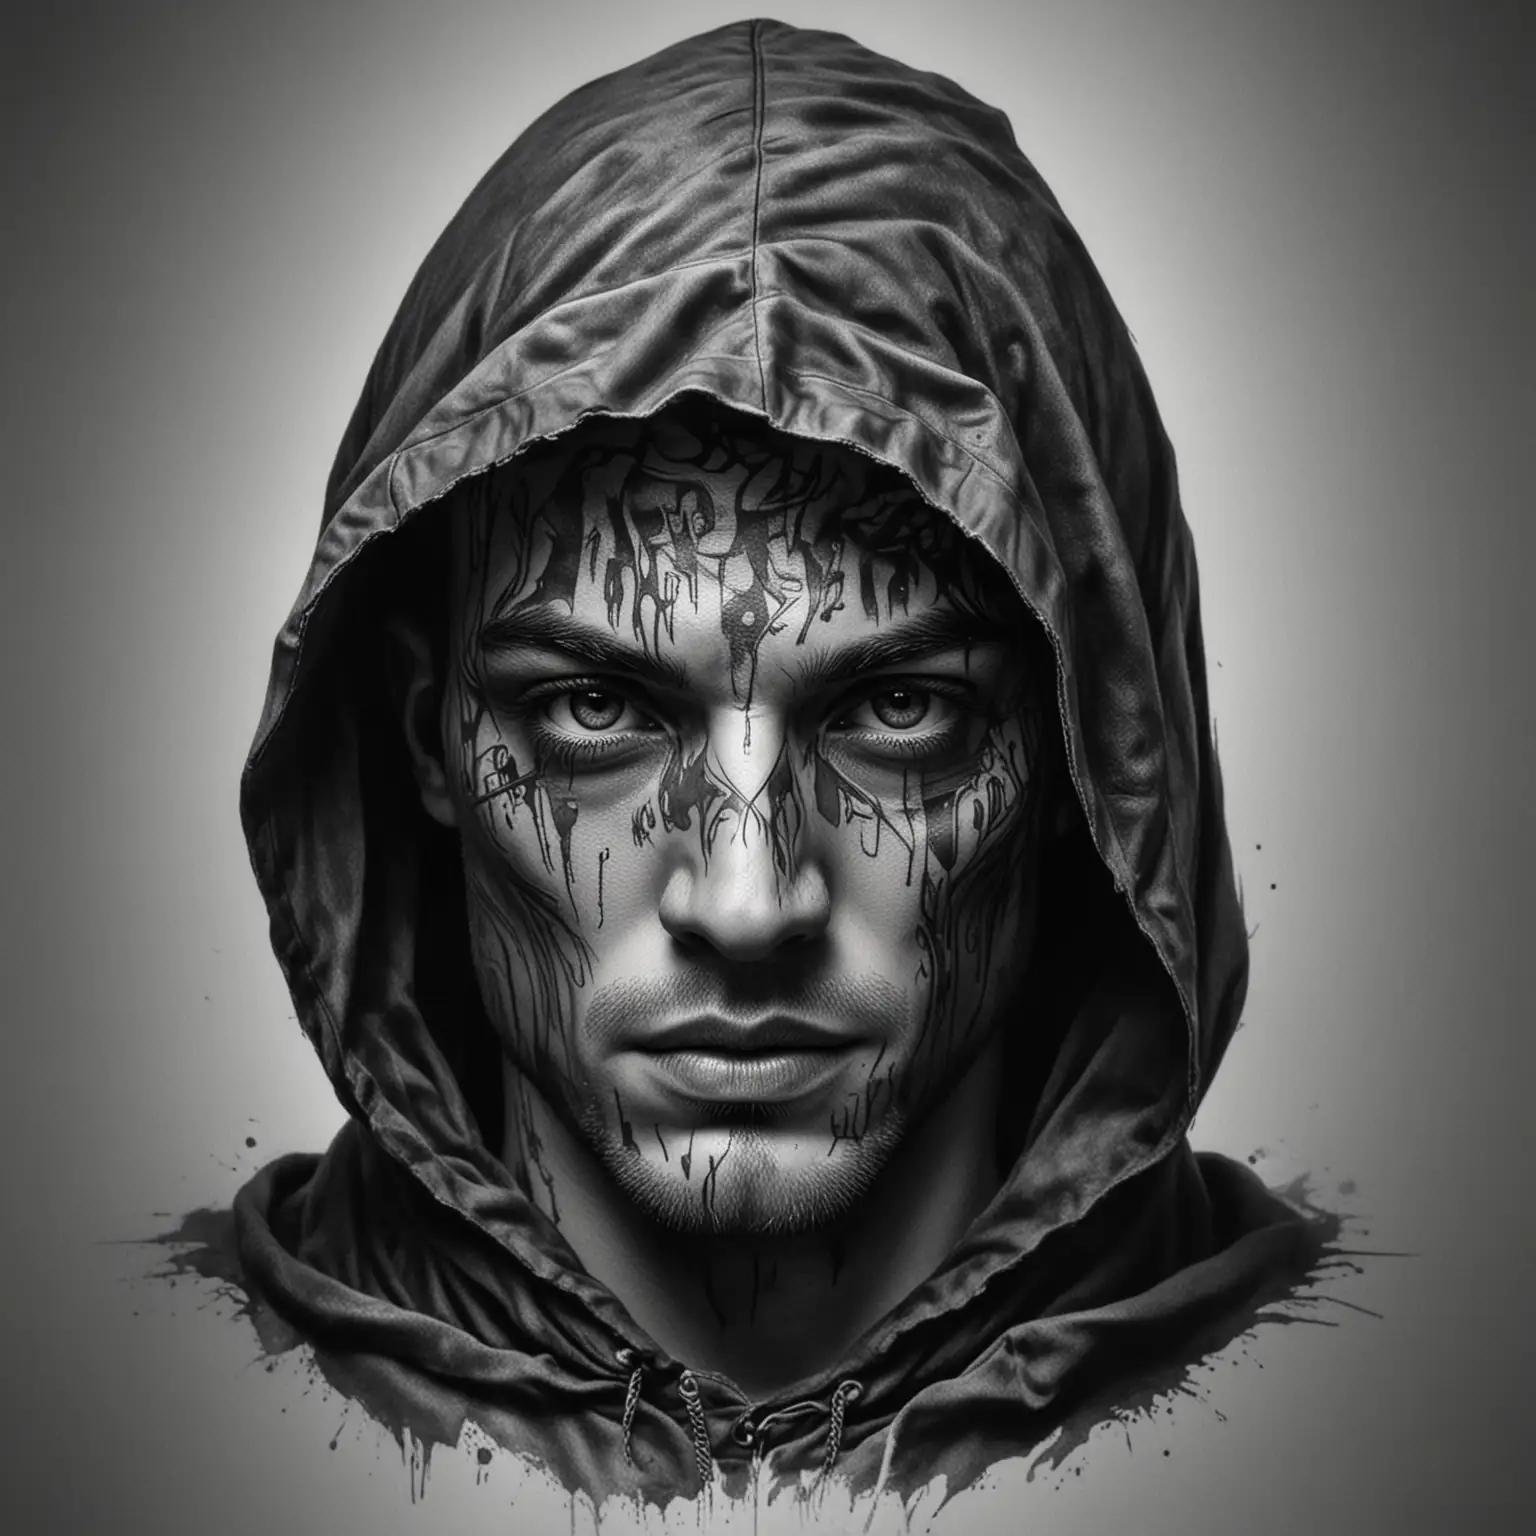 black and grey tattoo design of male face wearing hooded cloak, face is half shrouded in darkness, in black and white on white background